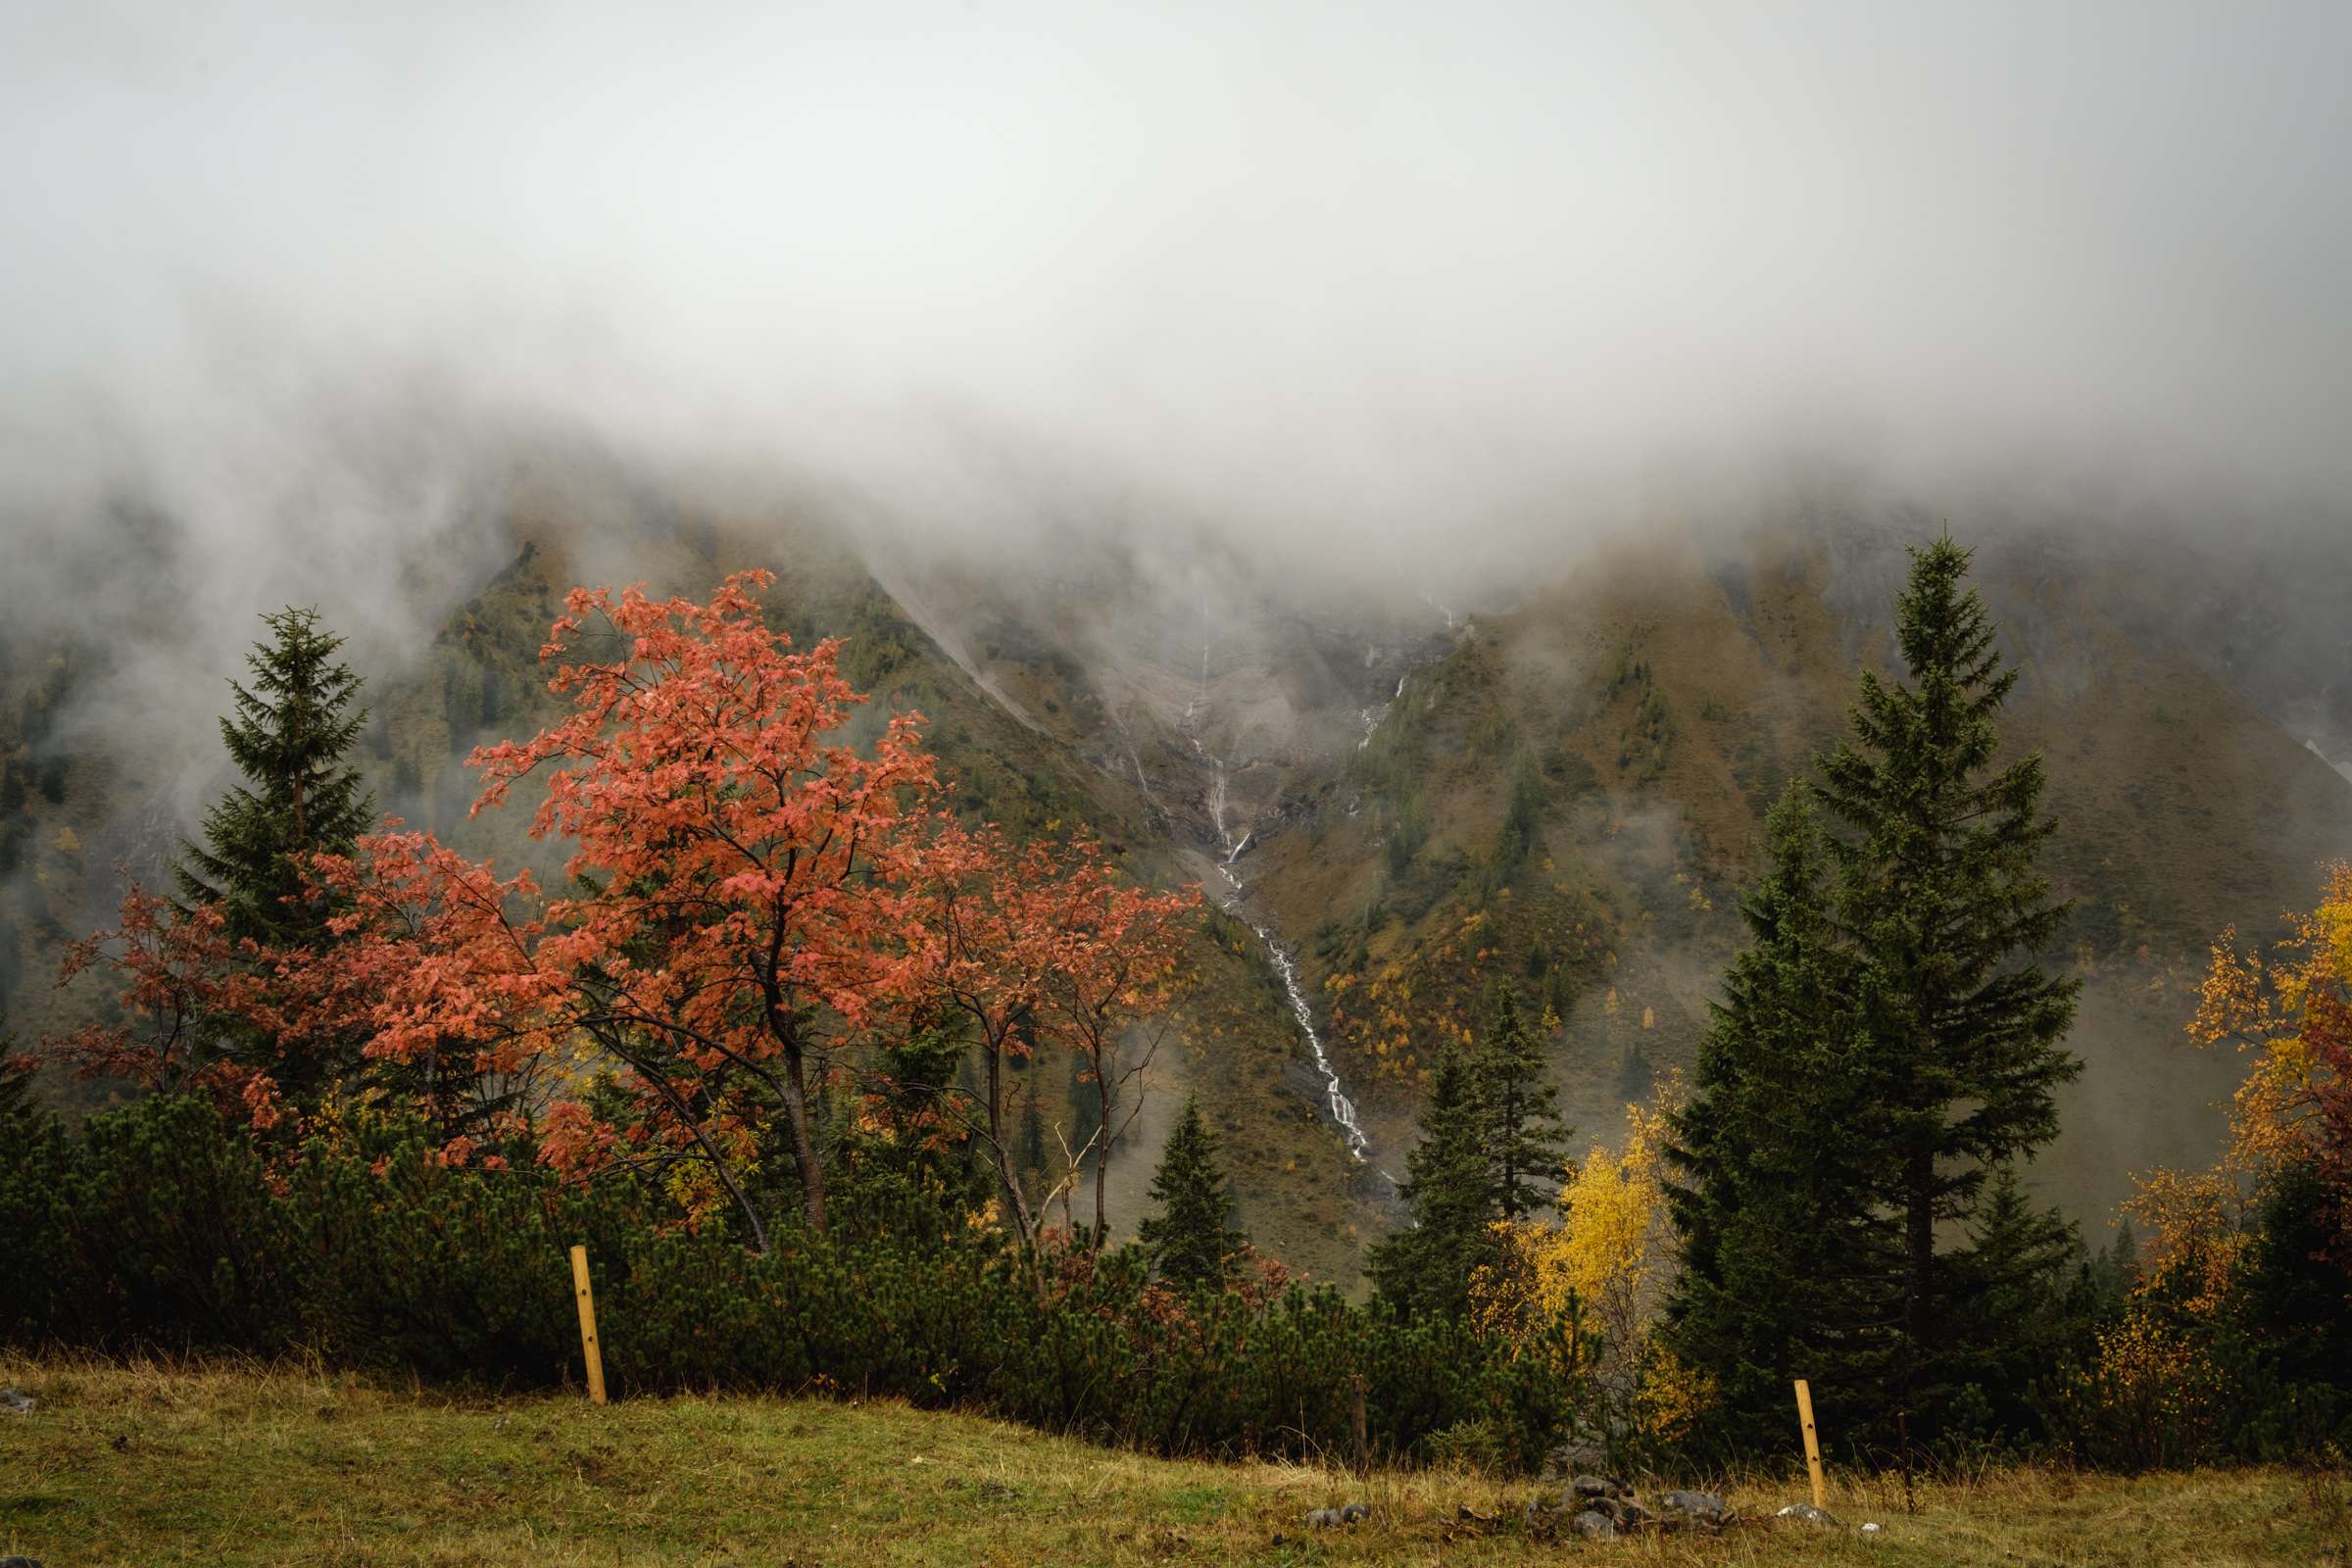 Clouds engulfing the valley, autumn trees and waterfalls